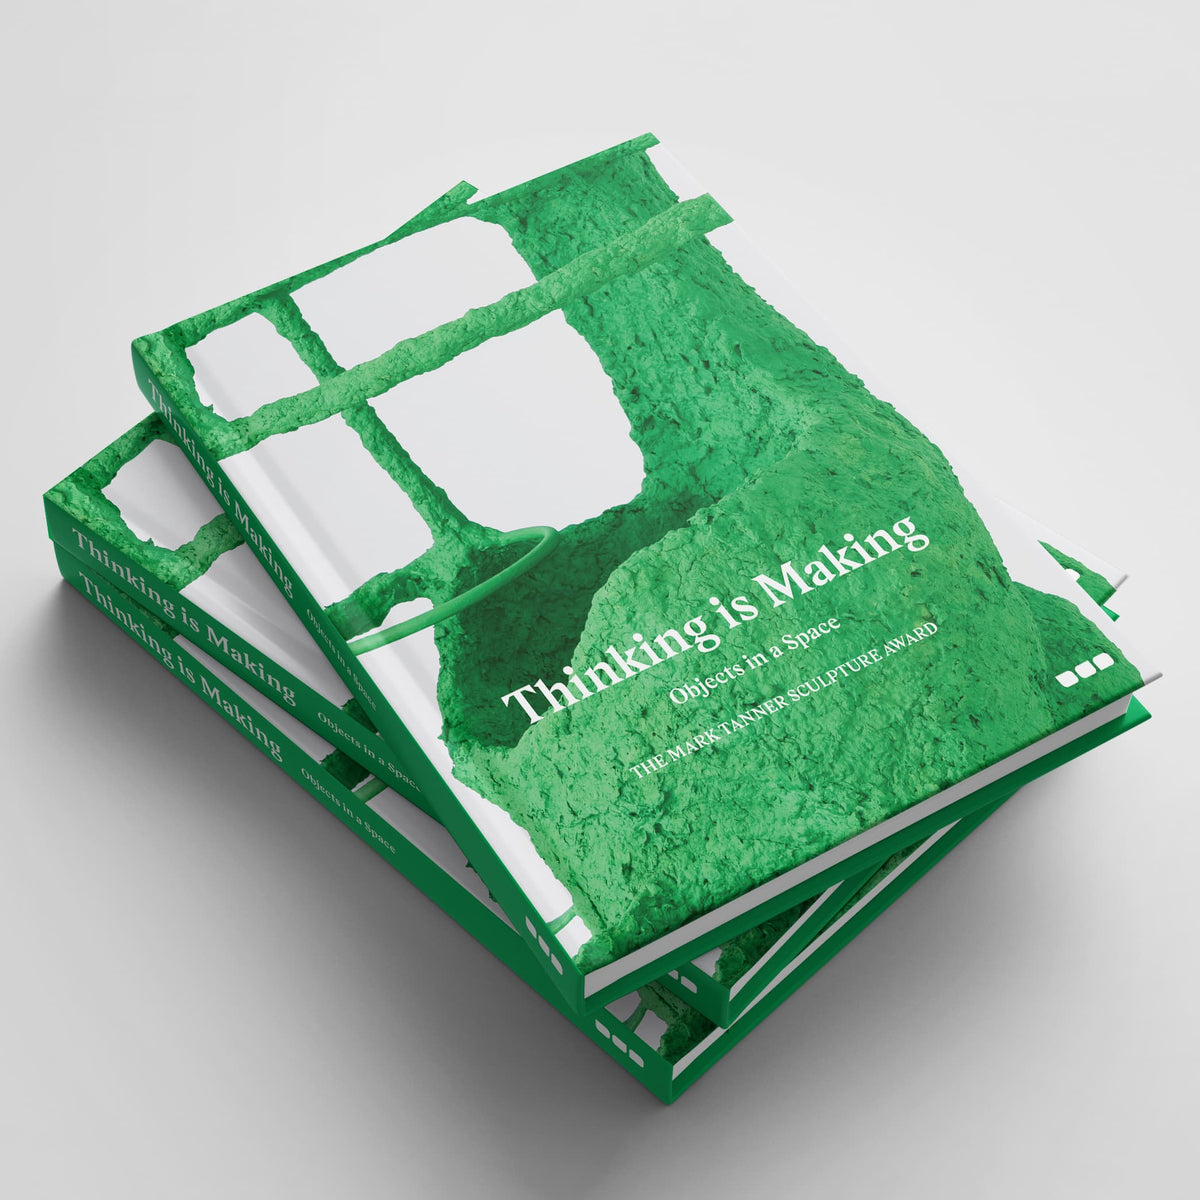 A stack of books titled "Thinking is Making: Objects in Space The Mark Tanner Sculpture Award," featuring a green and white abstract cover design, delves into contemporary sculptural practice, making it an essential read for emerging sculptors. Published by Black Dog Online.